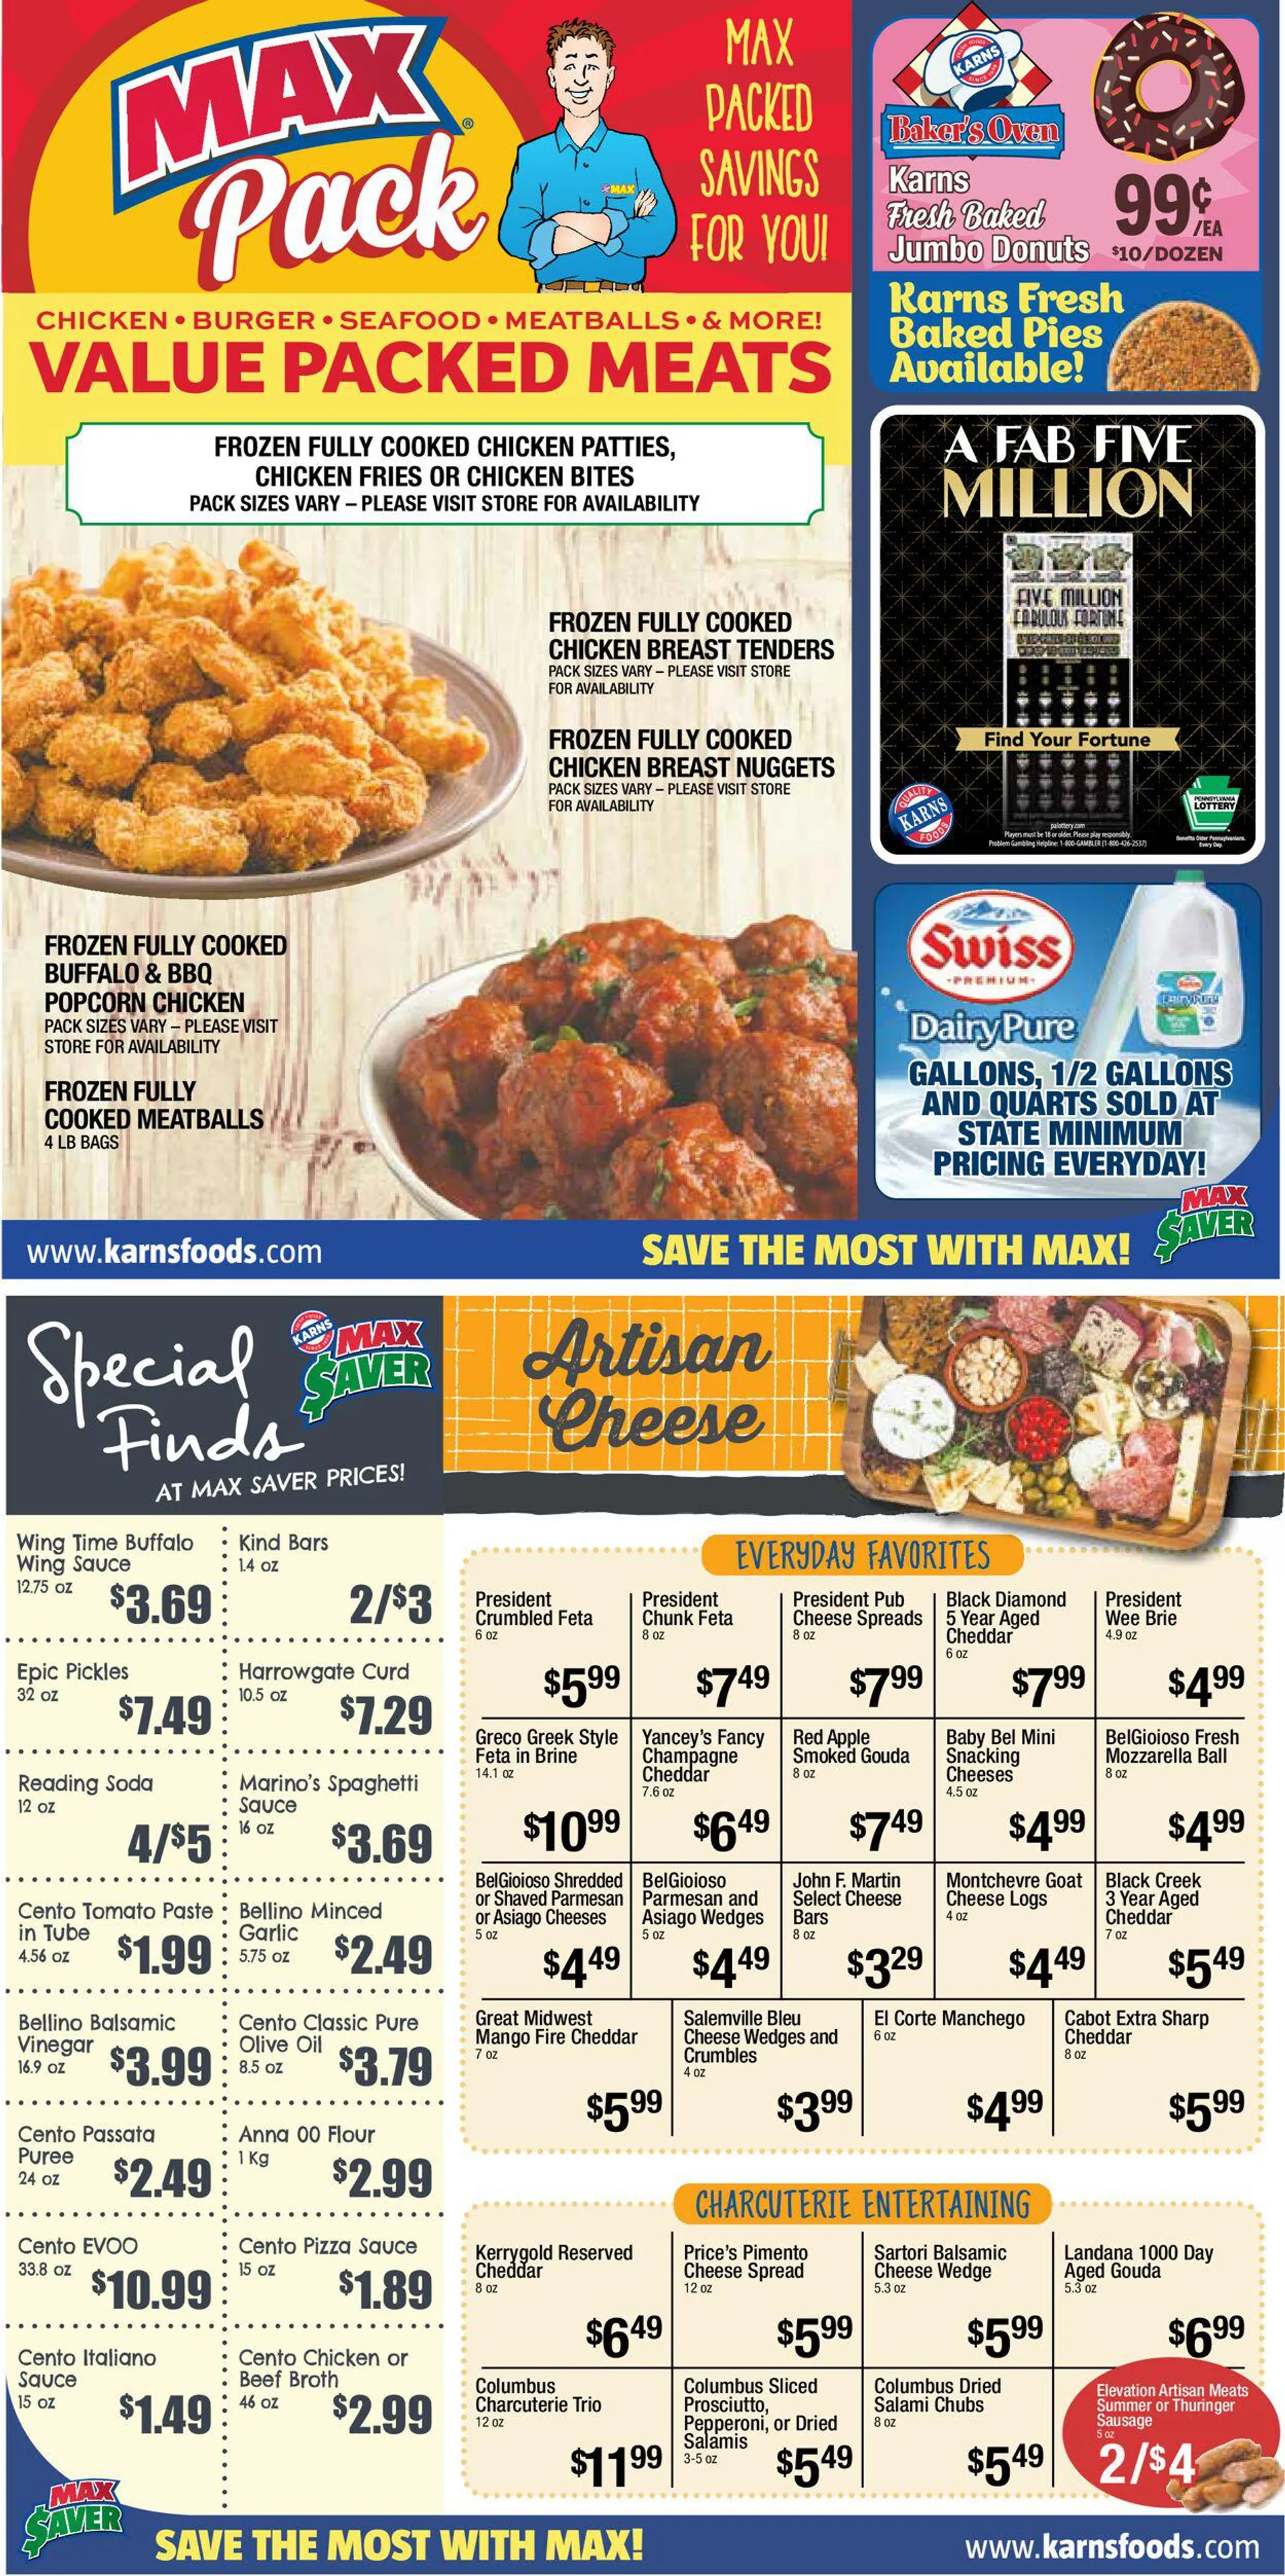 Karns Quality Foods Current weekly ad - 7